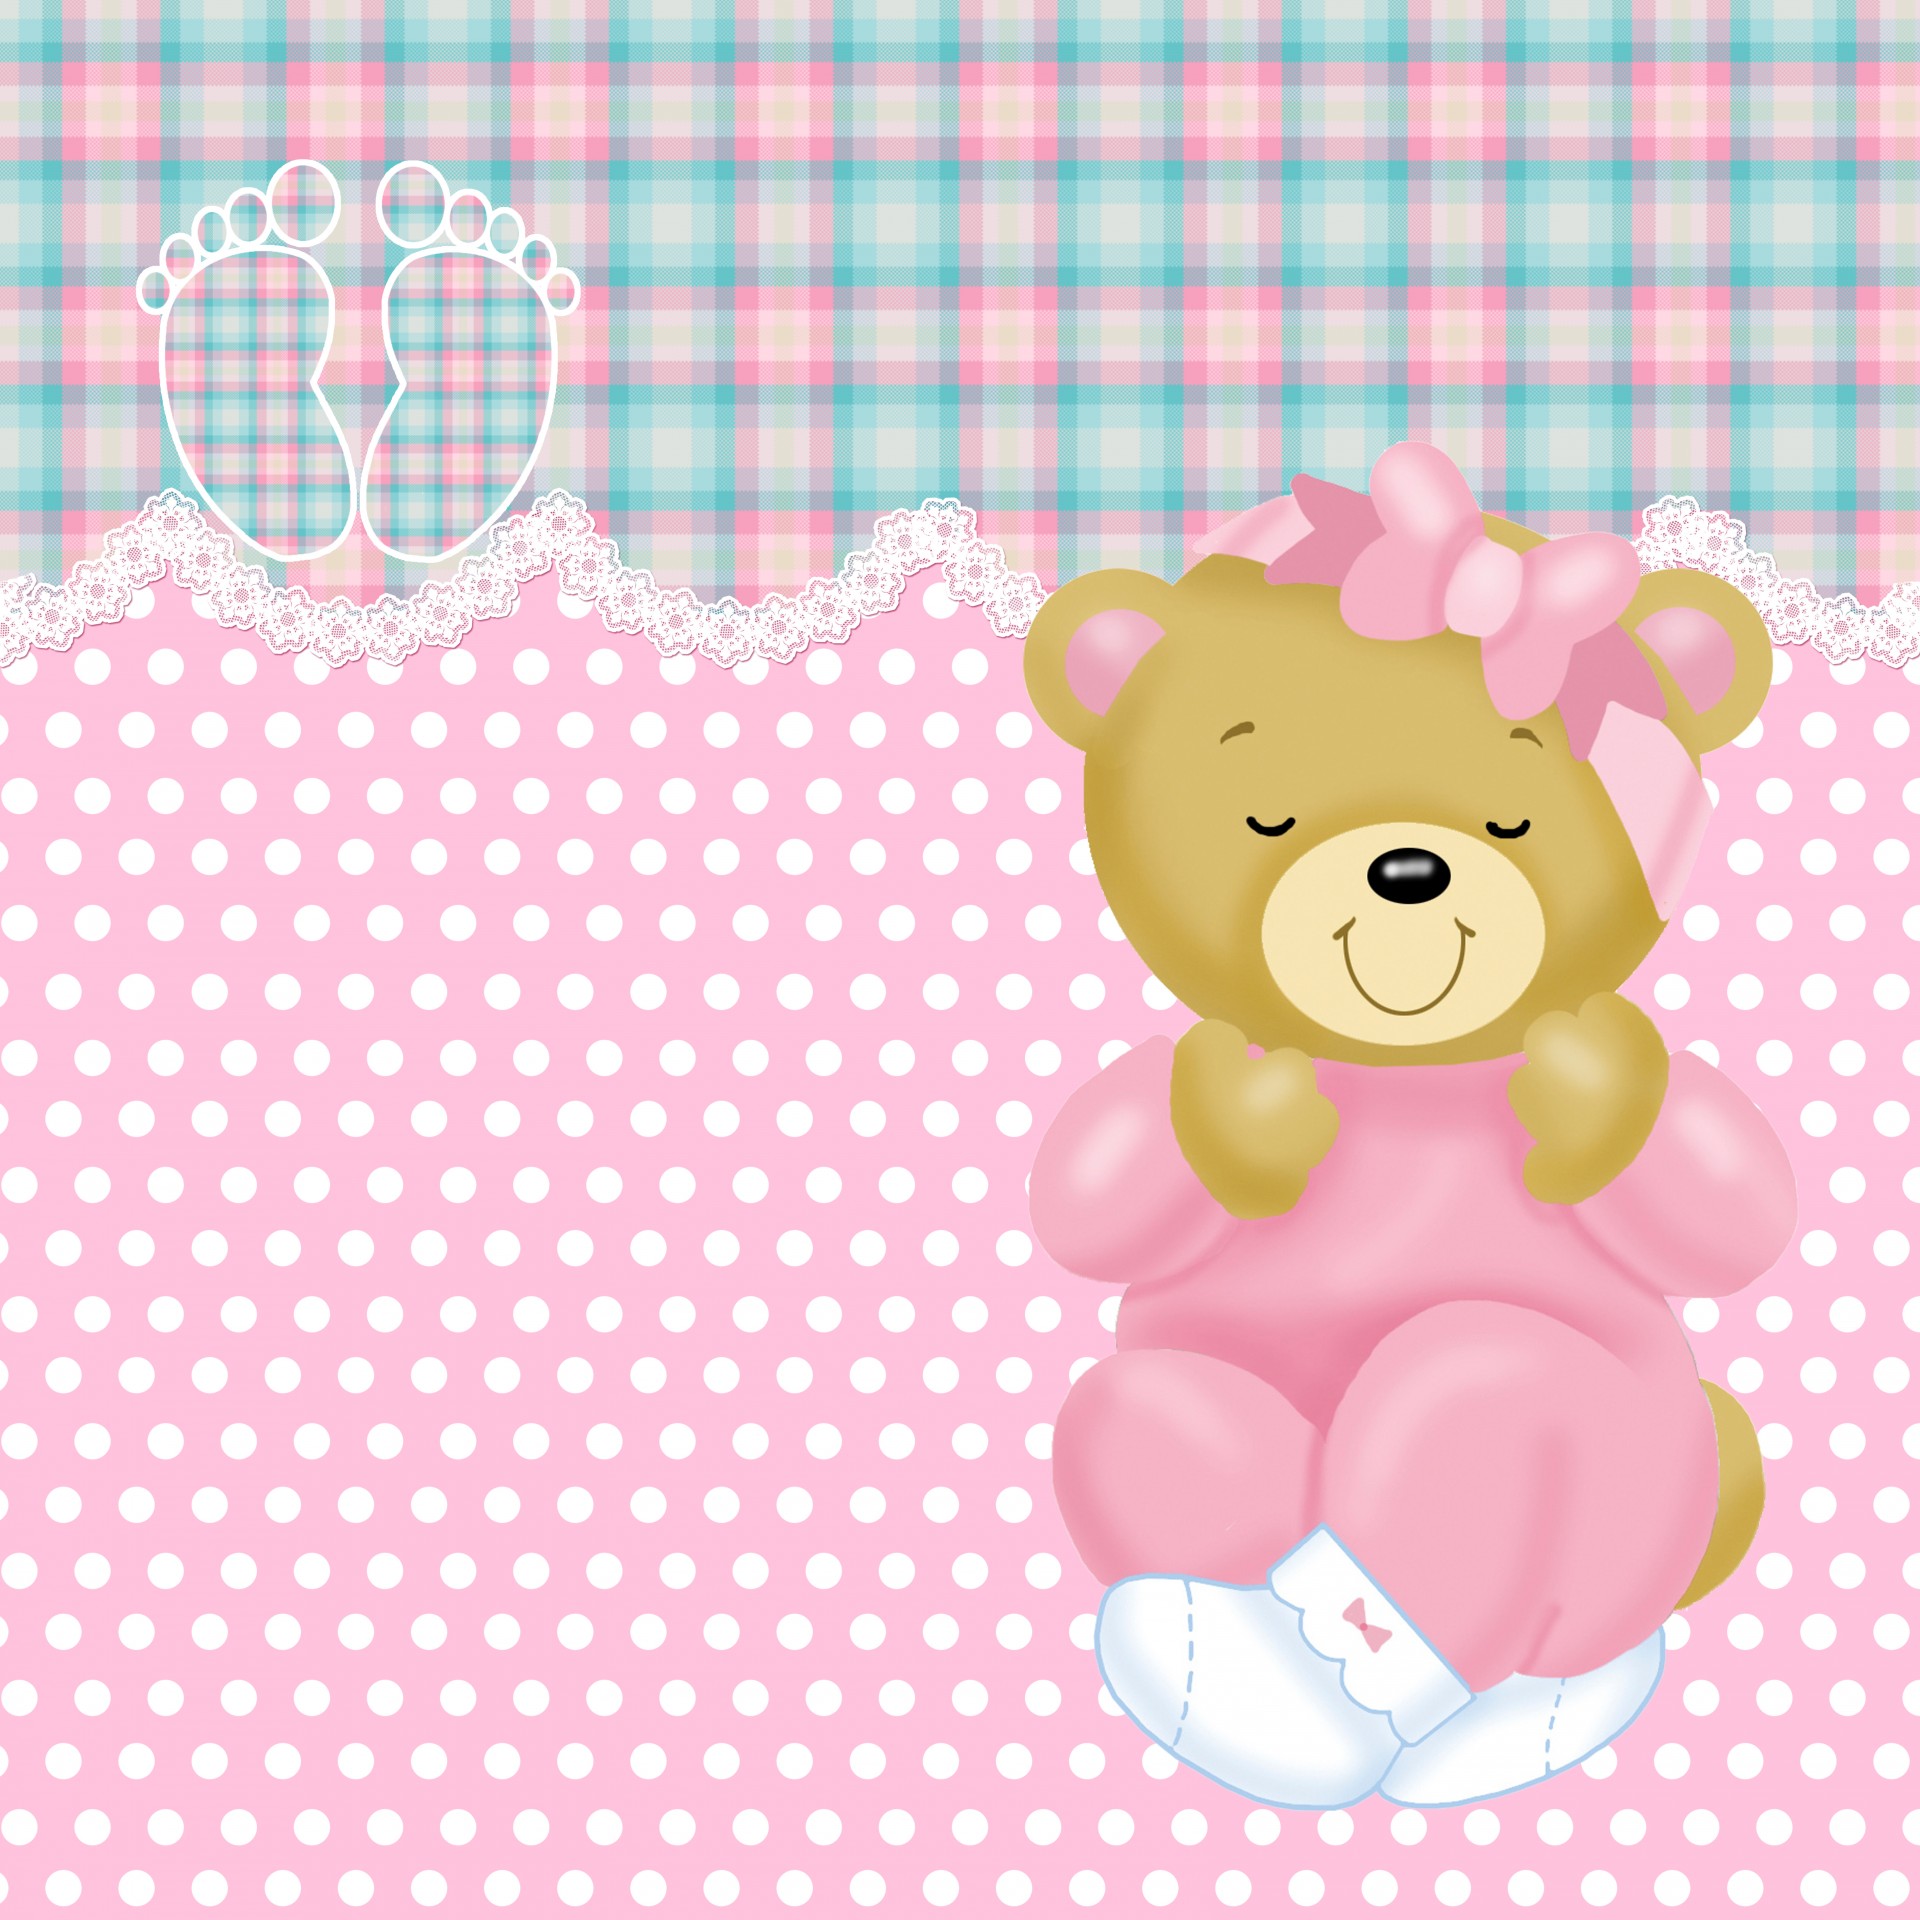 new baby girl pink gingham great for new babies pillows free photo